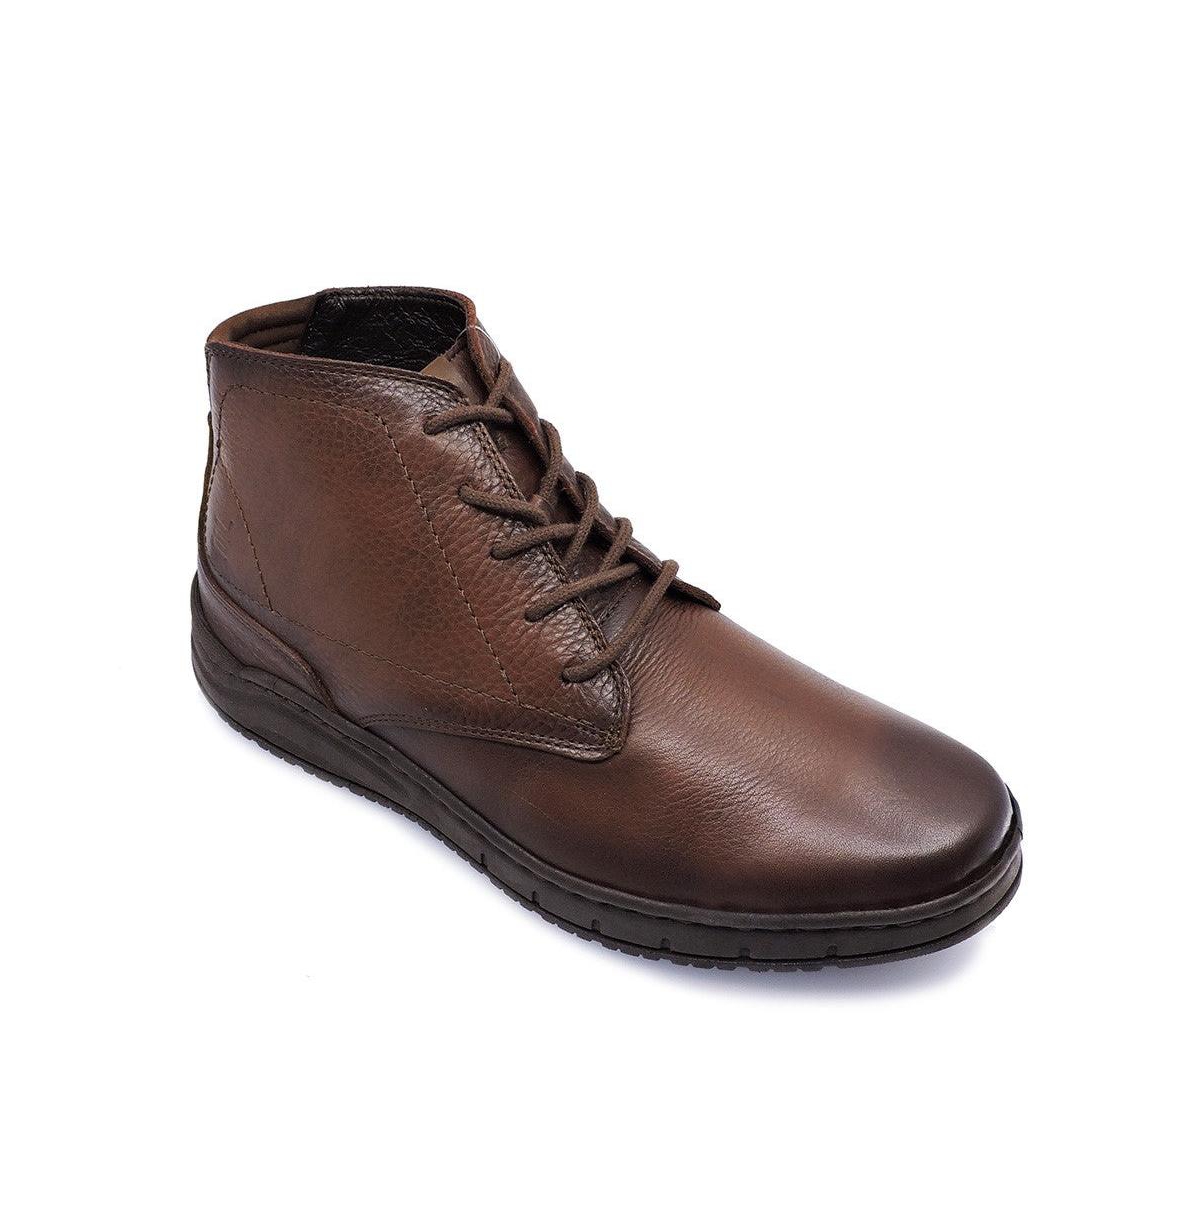 Men's Brown Premium Leather Boots, Handmade Unique Shoes With Laces Closure, Luka 9402 - Brown